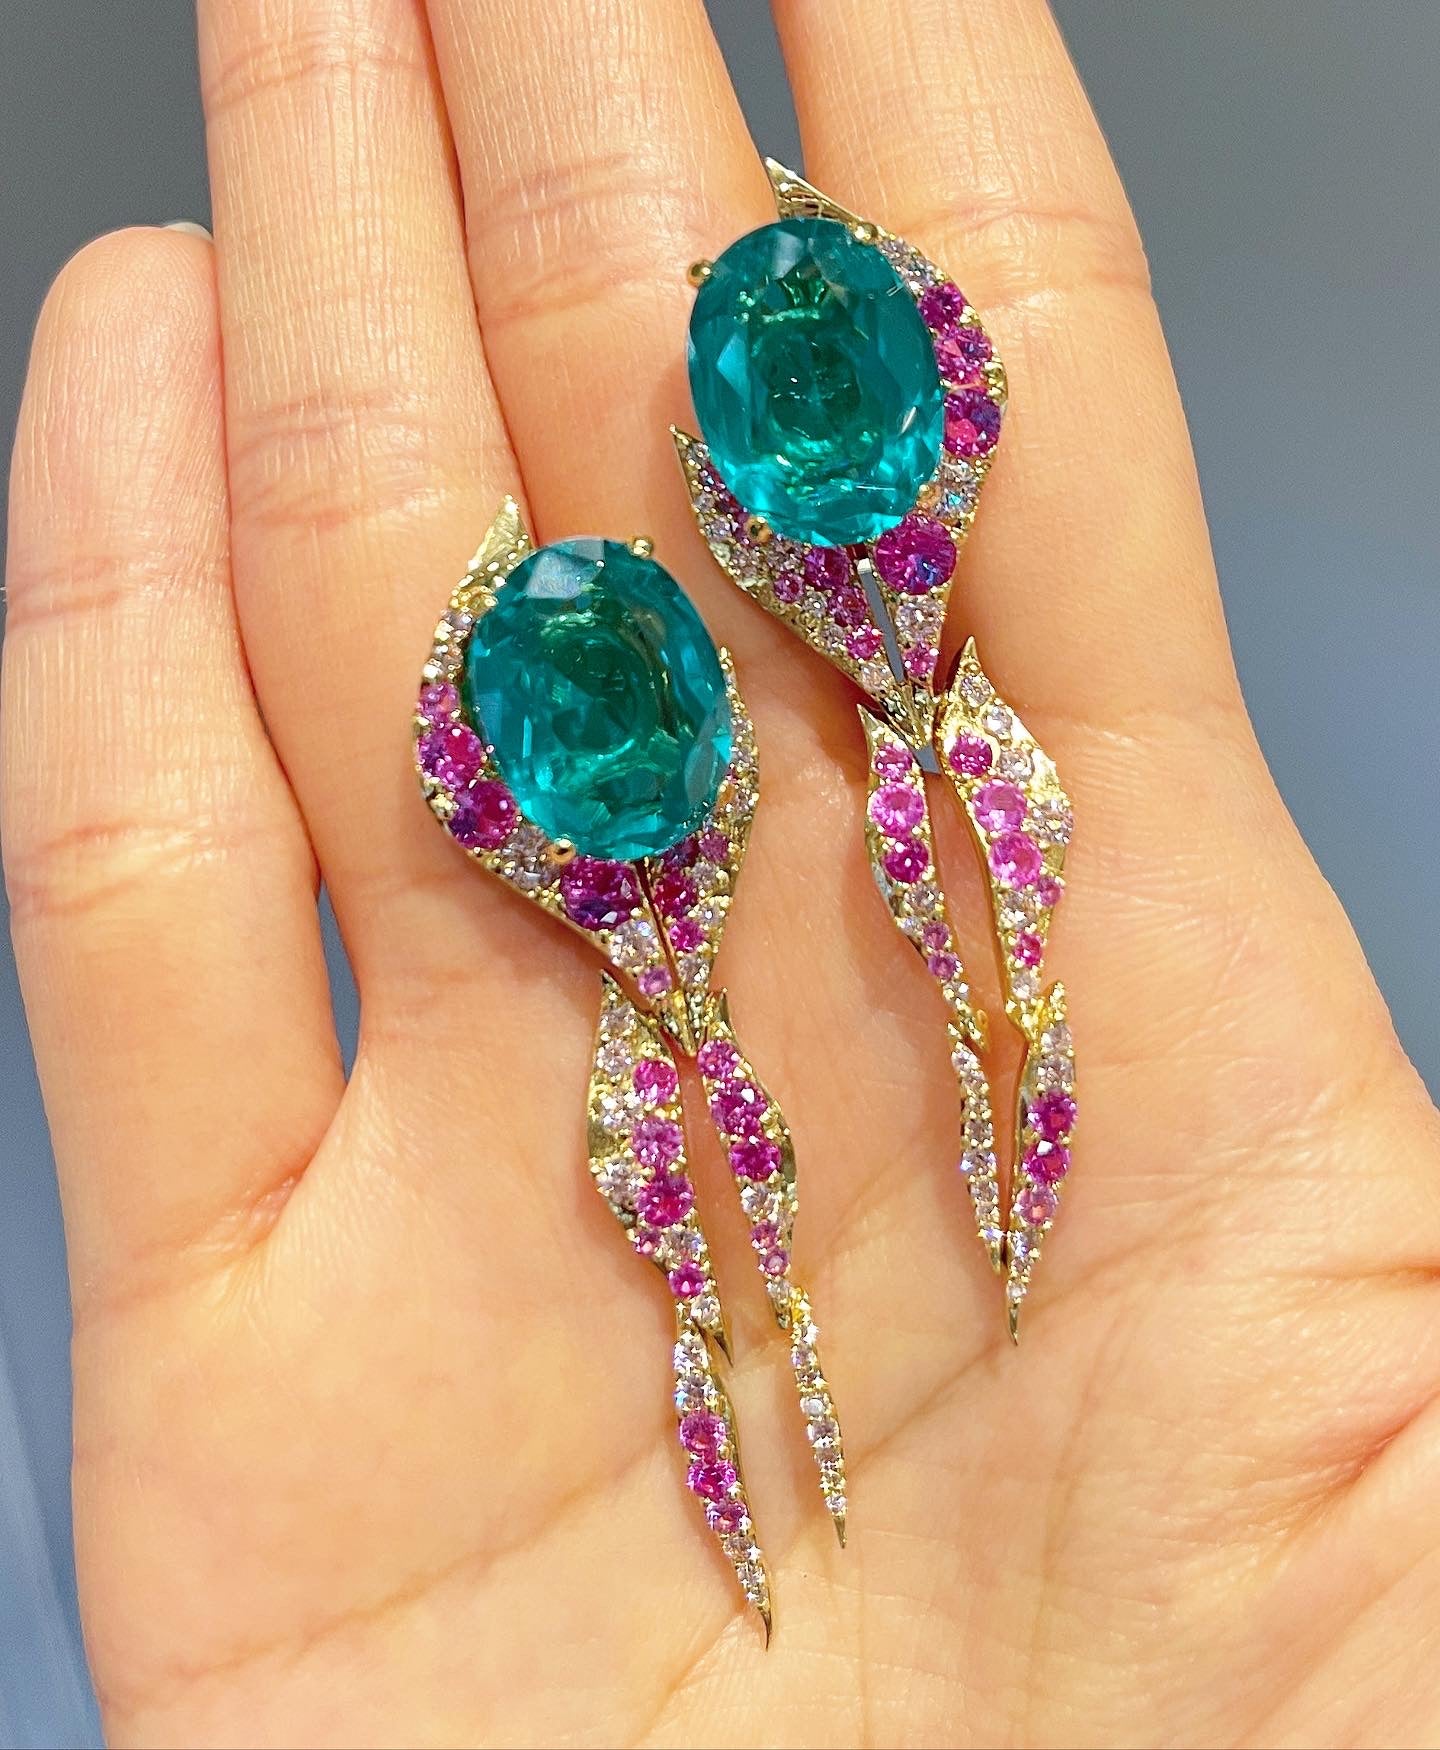 Paraiba Fin Earrings, Earrings, Anabela Chan Joaillerie - Fine jewelry with laboratory grown and created gemstones hand-crafted in the United Kingdom. Anabela Chan Joaillerie is the first fine jewellery brand in the world to champion laboratory-grown and created gemstones with high jewellery design, artisanal craftsmanship and a focus on ethical and sustainable innovations.